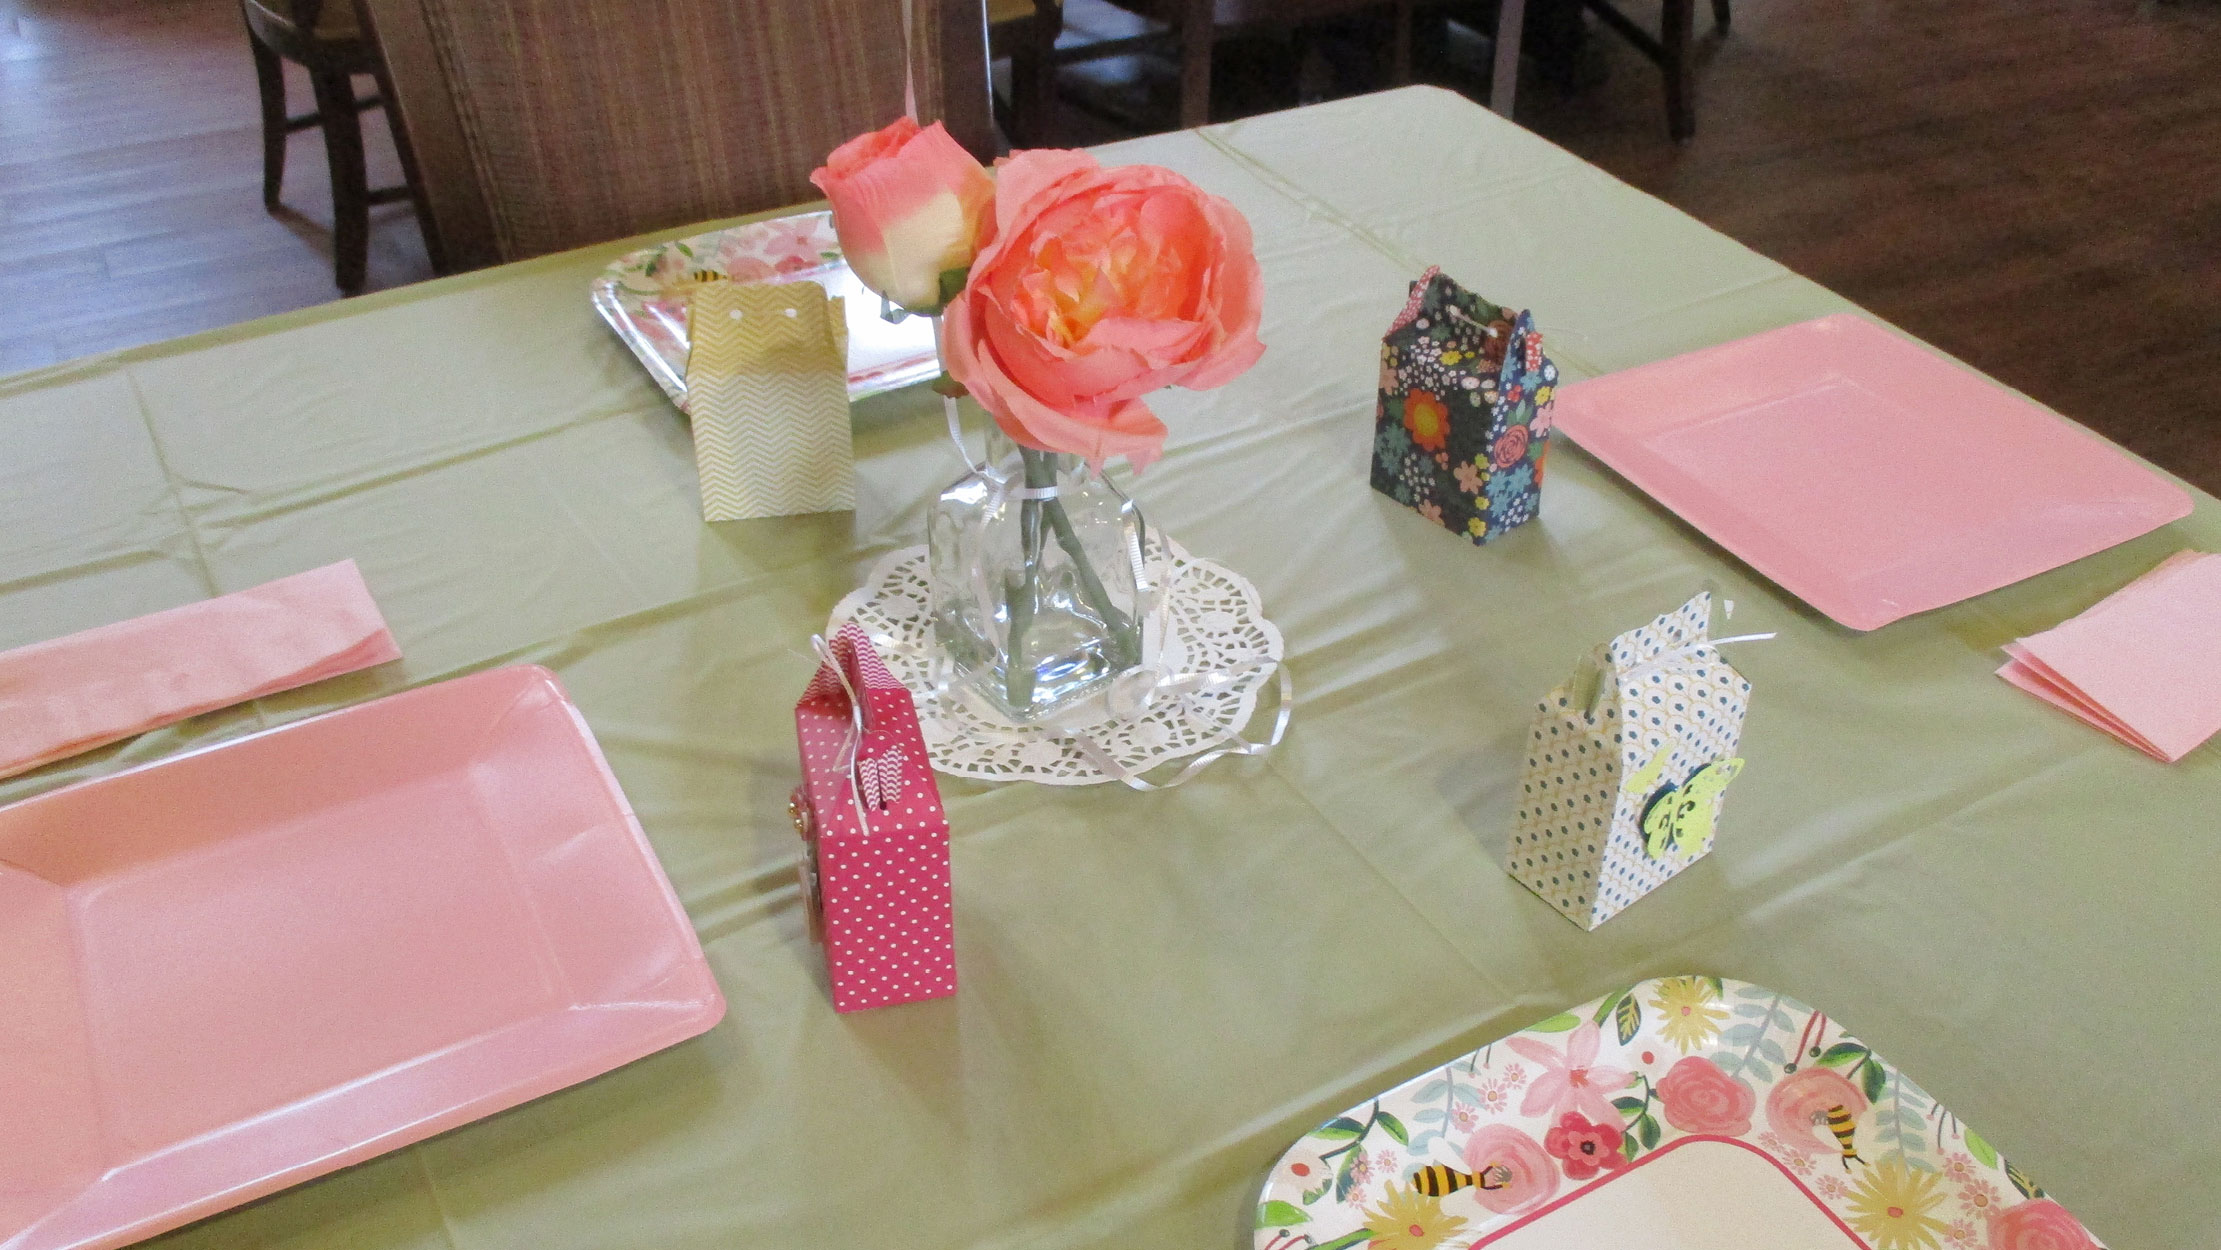 Myrtle Terraces, a Fairway Management senior community located in Gainesville, Georgia, hosted a very special Mother’s Day Luncheon for residents and their families!